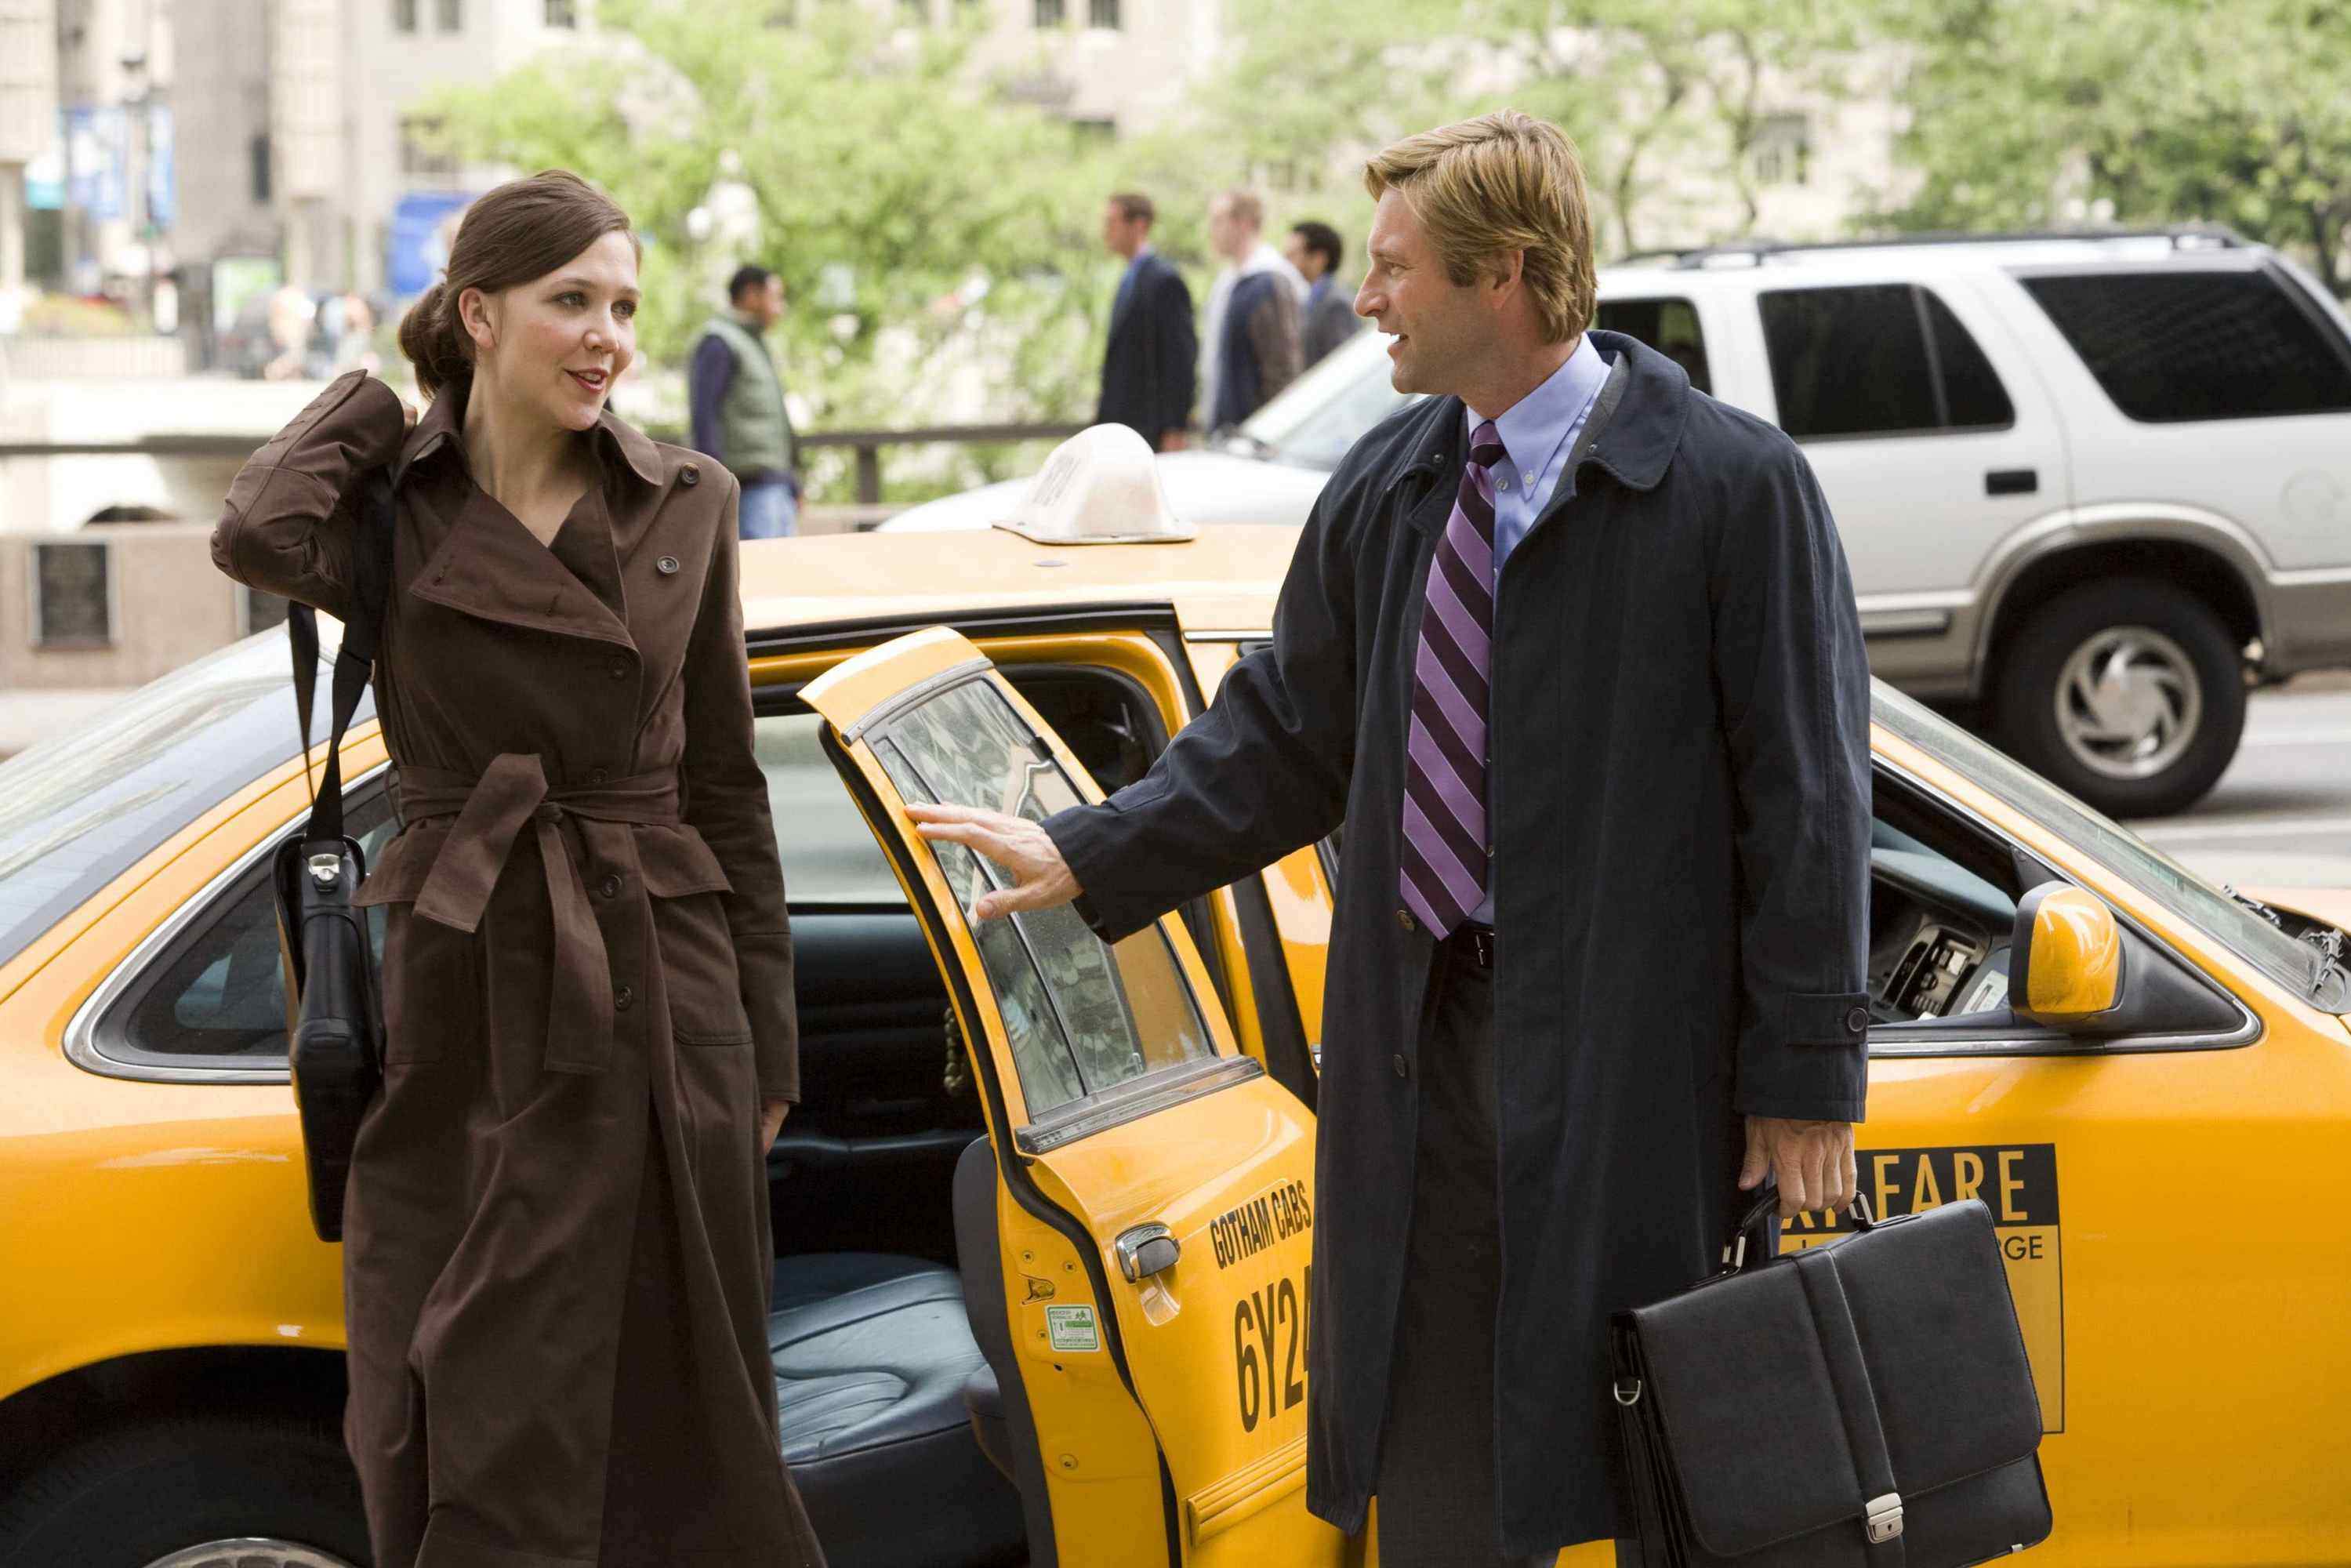 MAGGIE GYLLENHAAL stars as Rachel Dawes and AARON ECKHART stars as Harvey Dent in Warner Bros. Pictures' and Legendary Pictures' action drama 